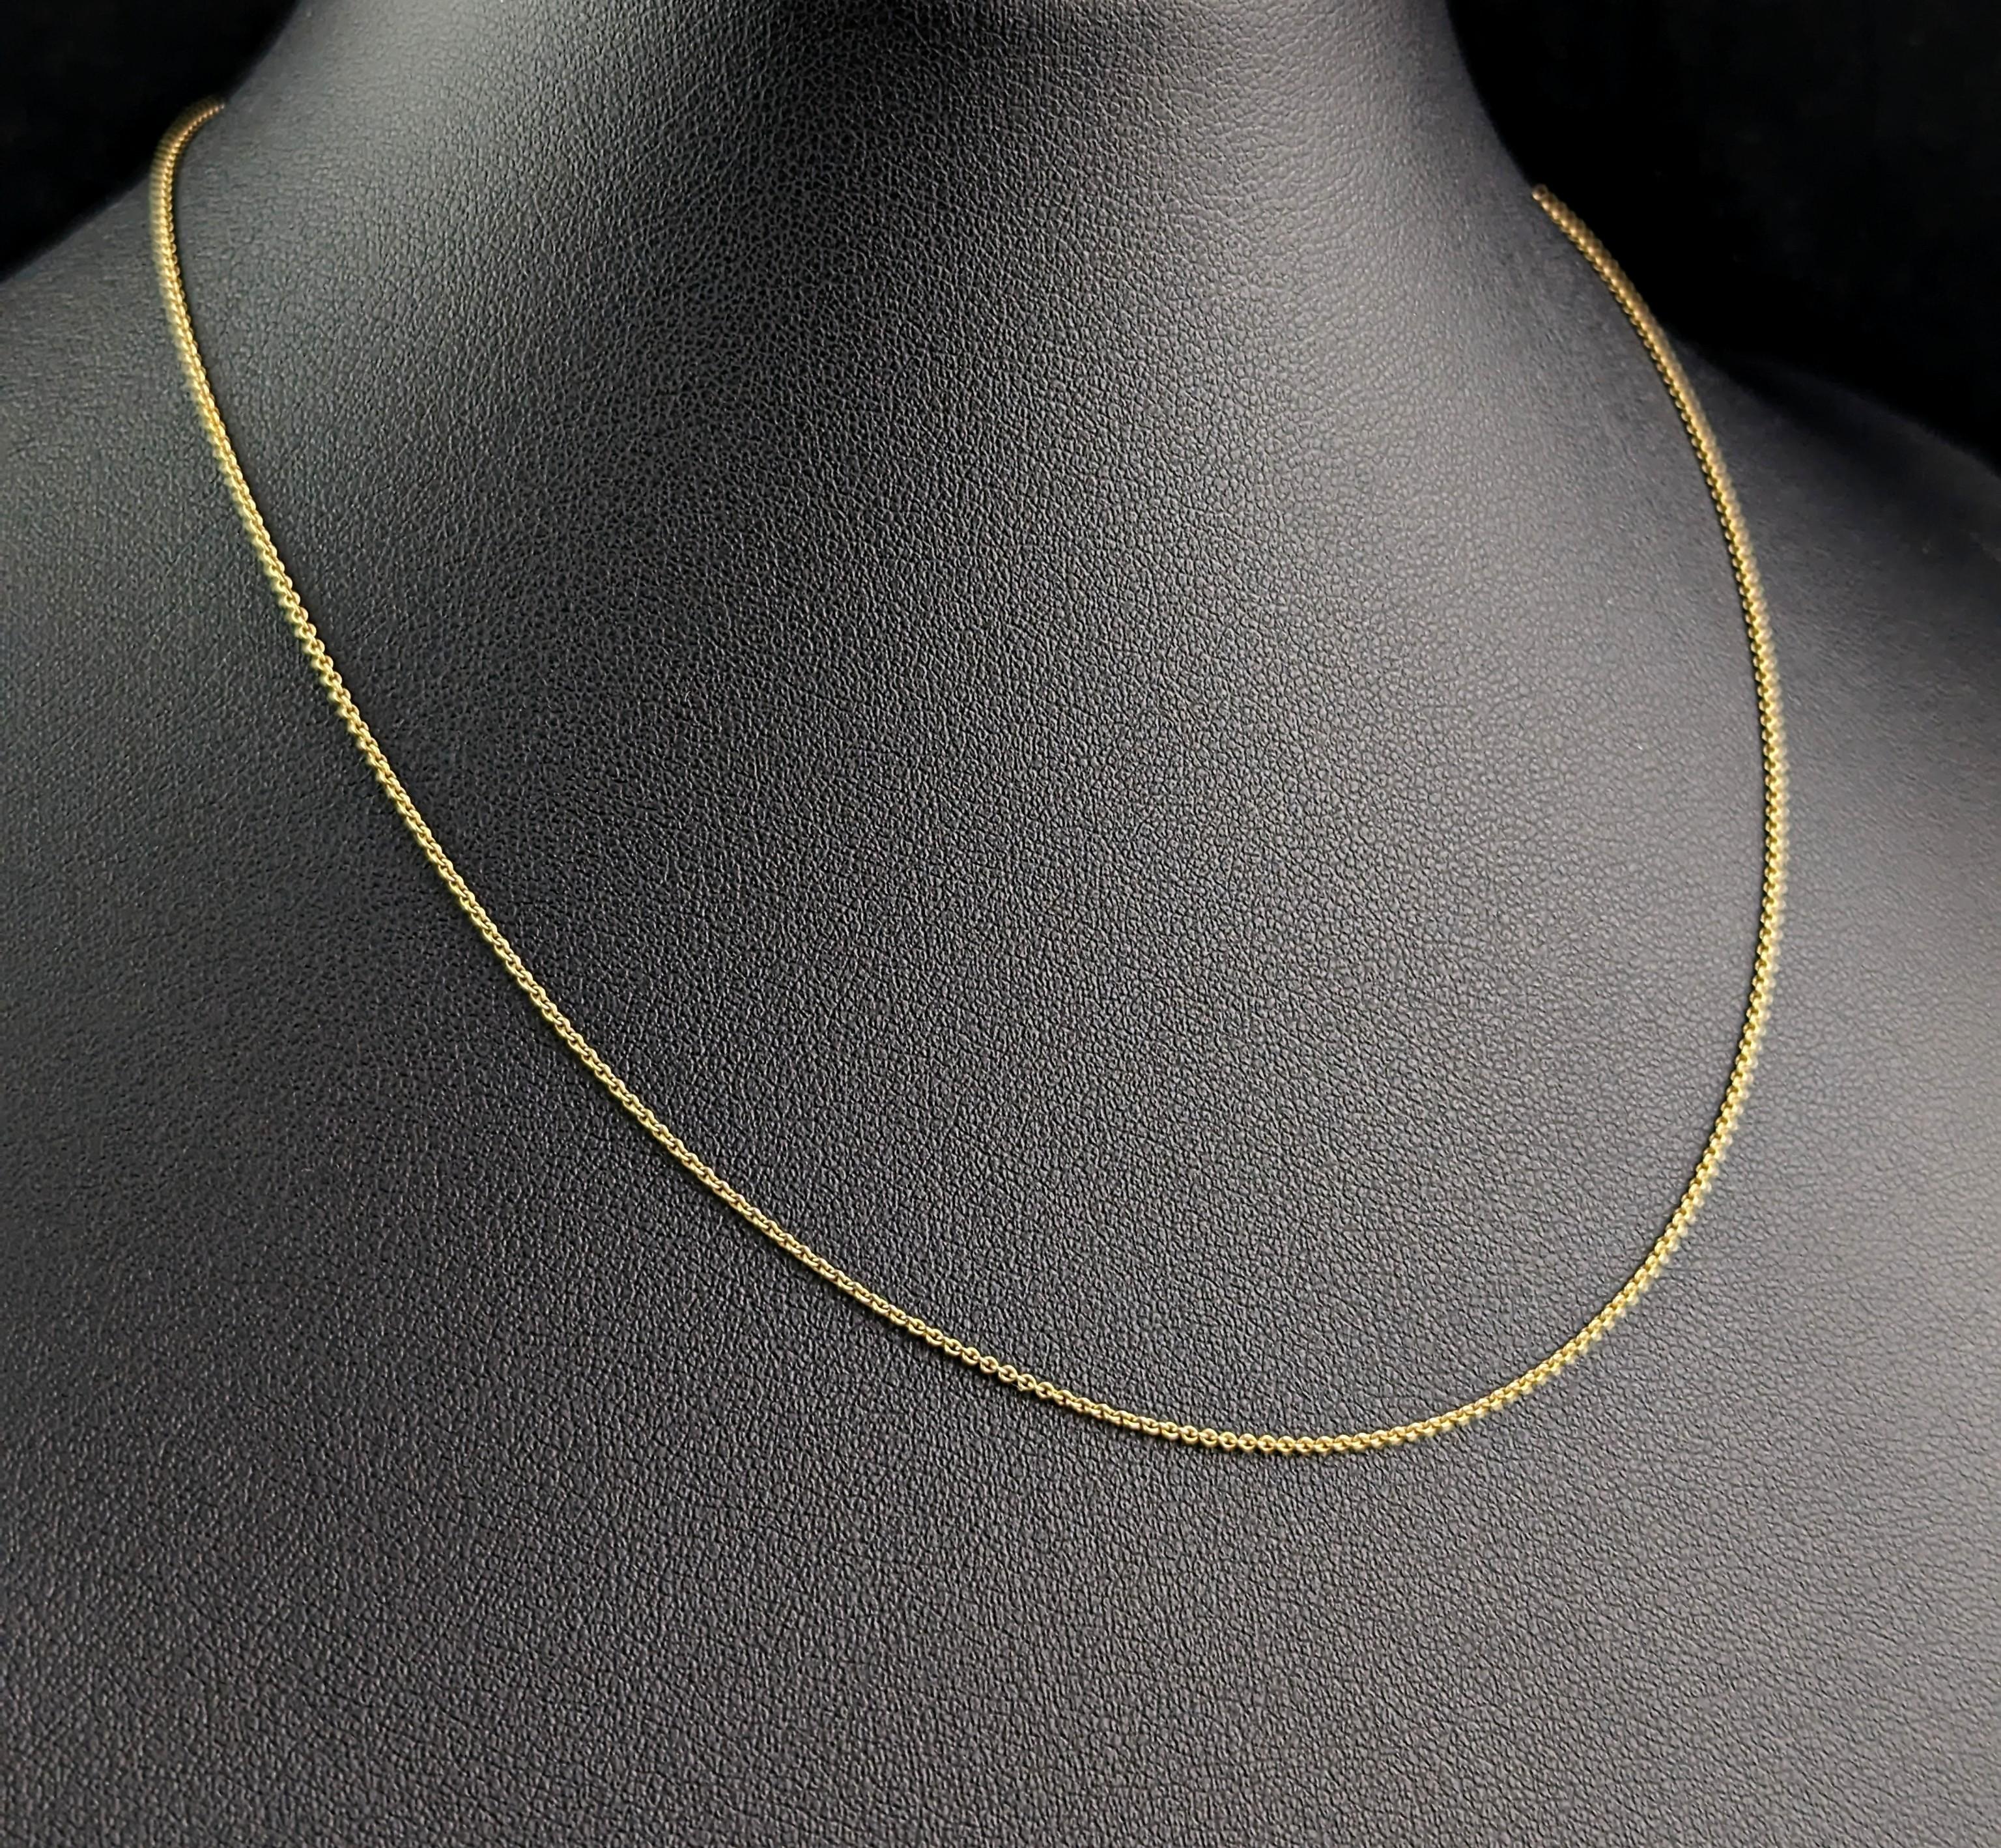 A fine dainty antique 15ct gold trace chain such as this is the perfect accompaniment to your favourite small lockets, pendants and charms.

It is a fine rolo trace link in a rich yellow gold with a spring ring clasp.

It is a mid length and will